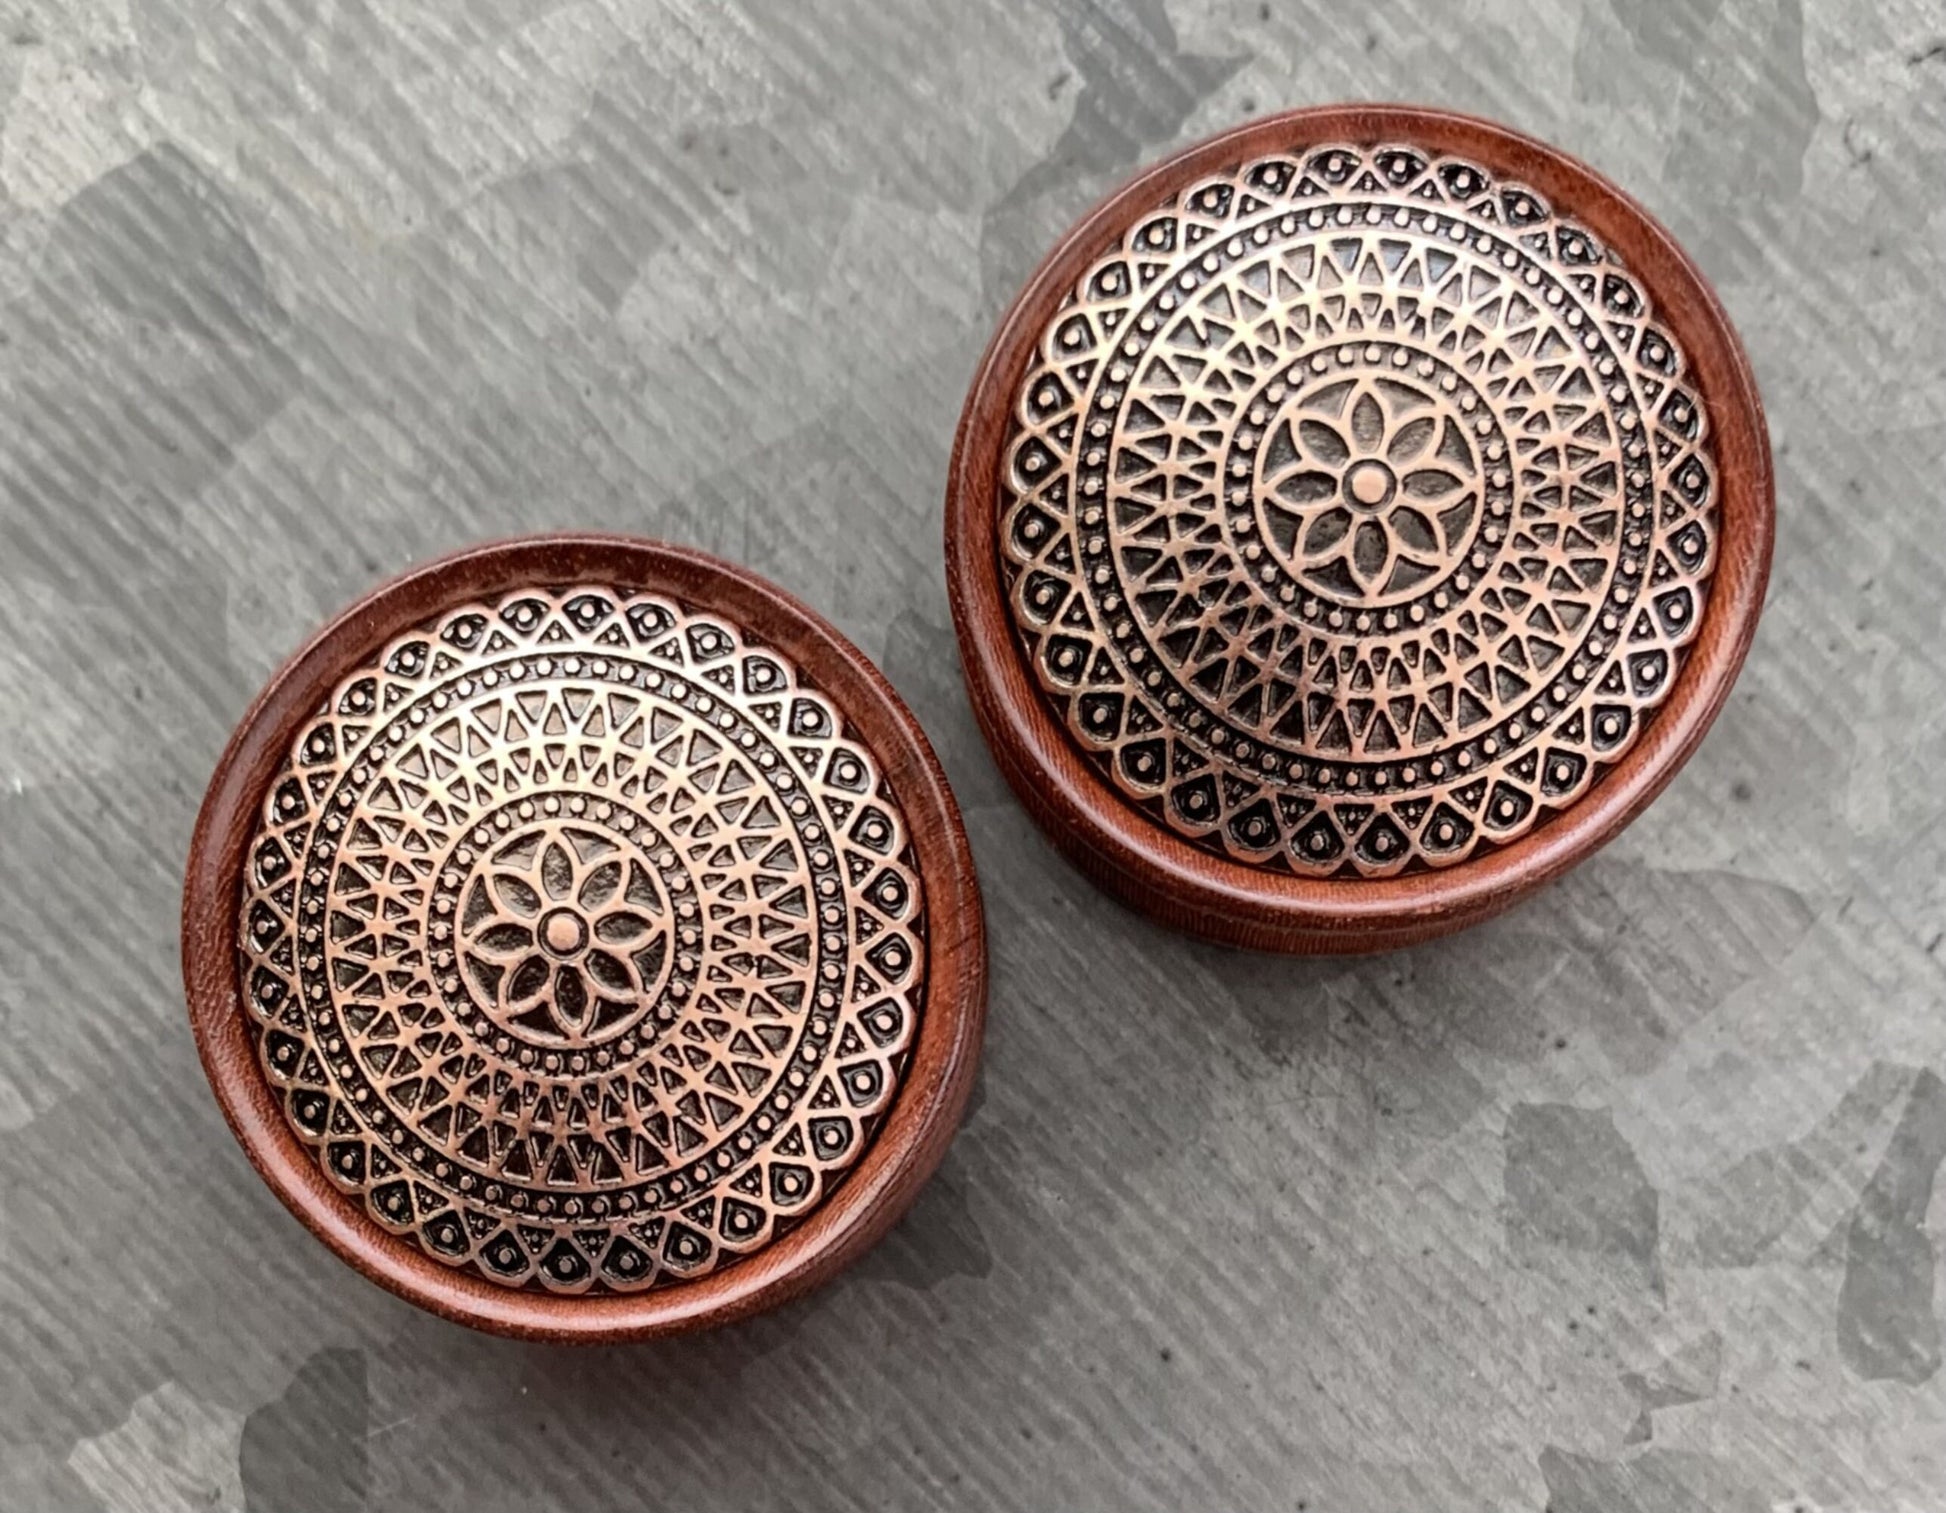 PAIR of Unique Organic Rose Wood with Flower Lattice Pattern Saddle Plugs - Gauges 2g (6mm) up to 1" (25mm) available!